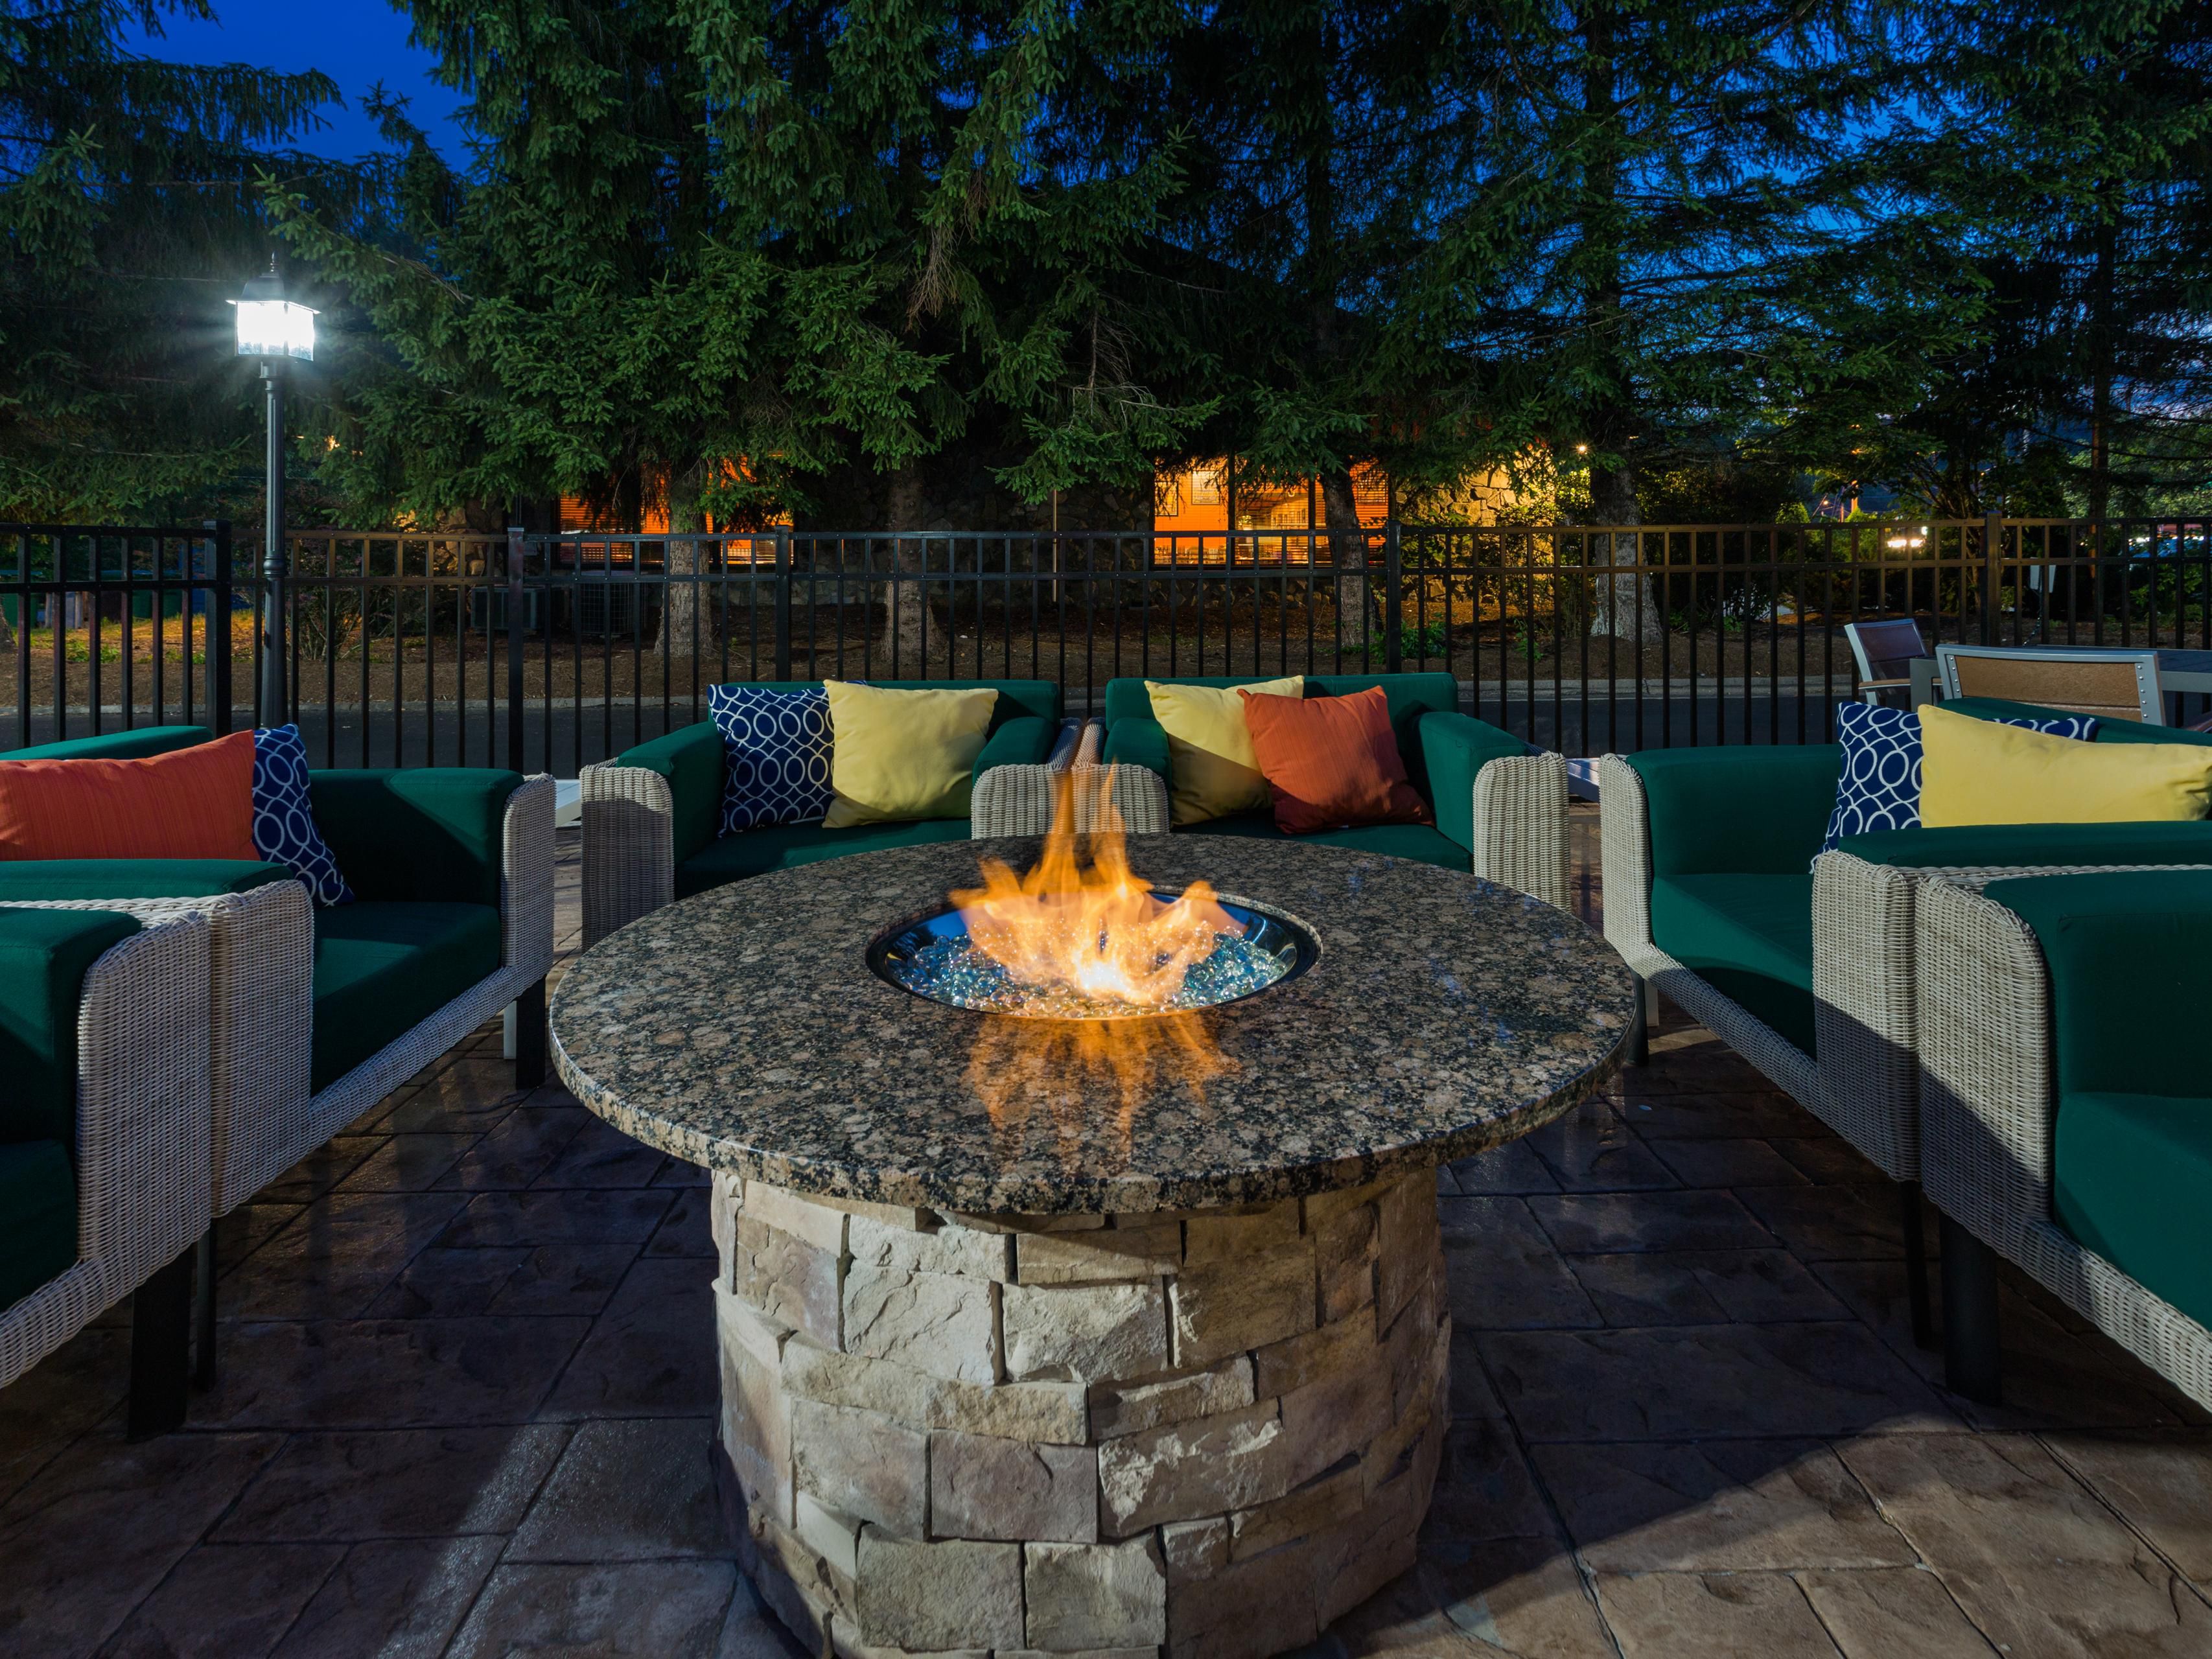 Enjoy your evening relaxing and reminiscing by our fire pit. 